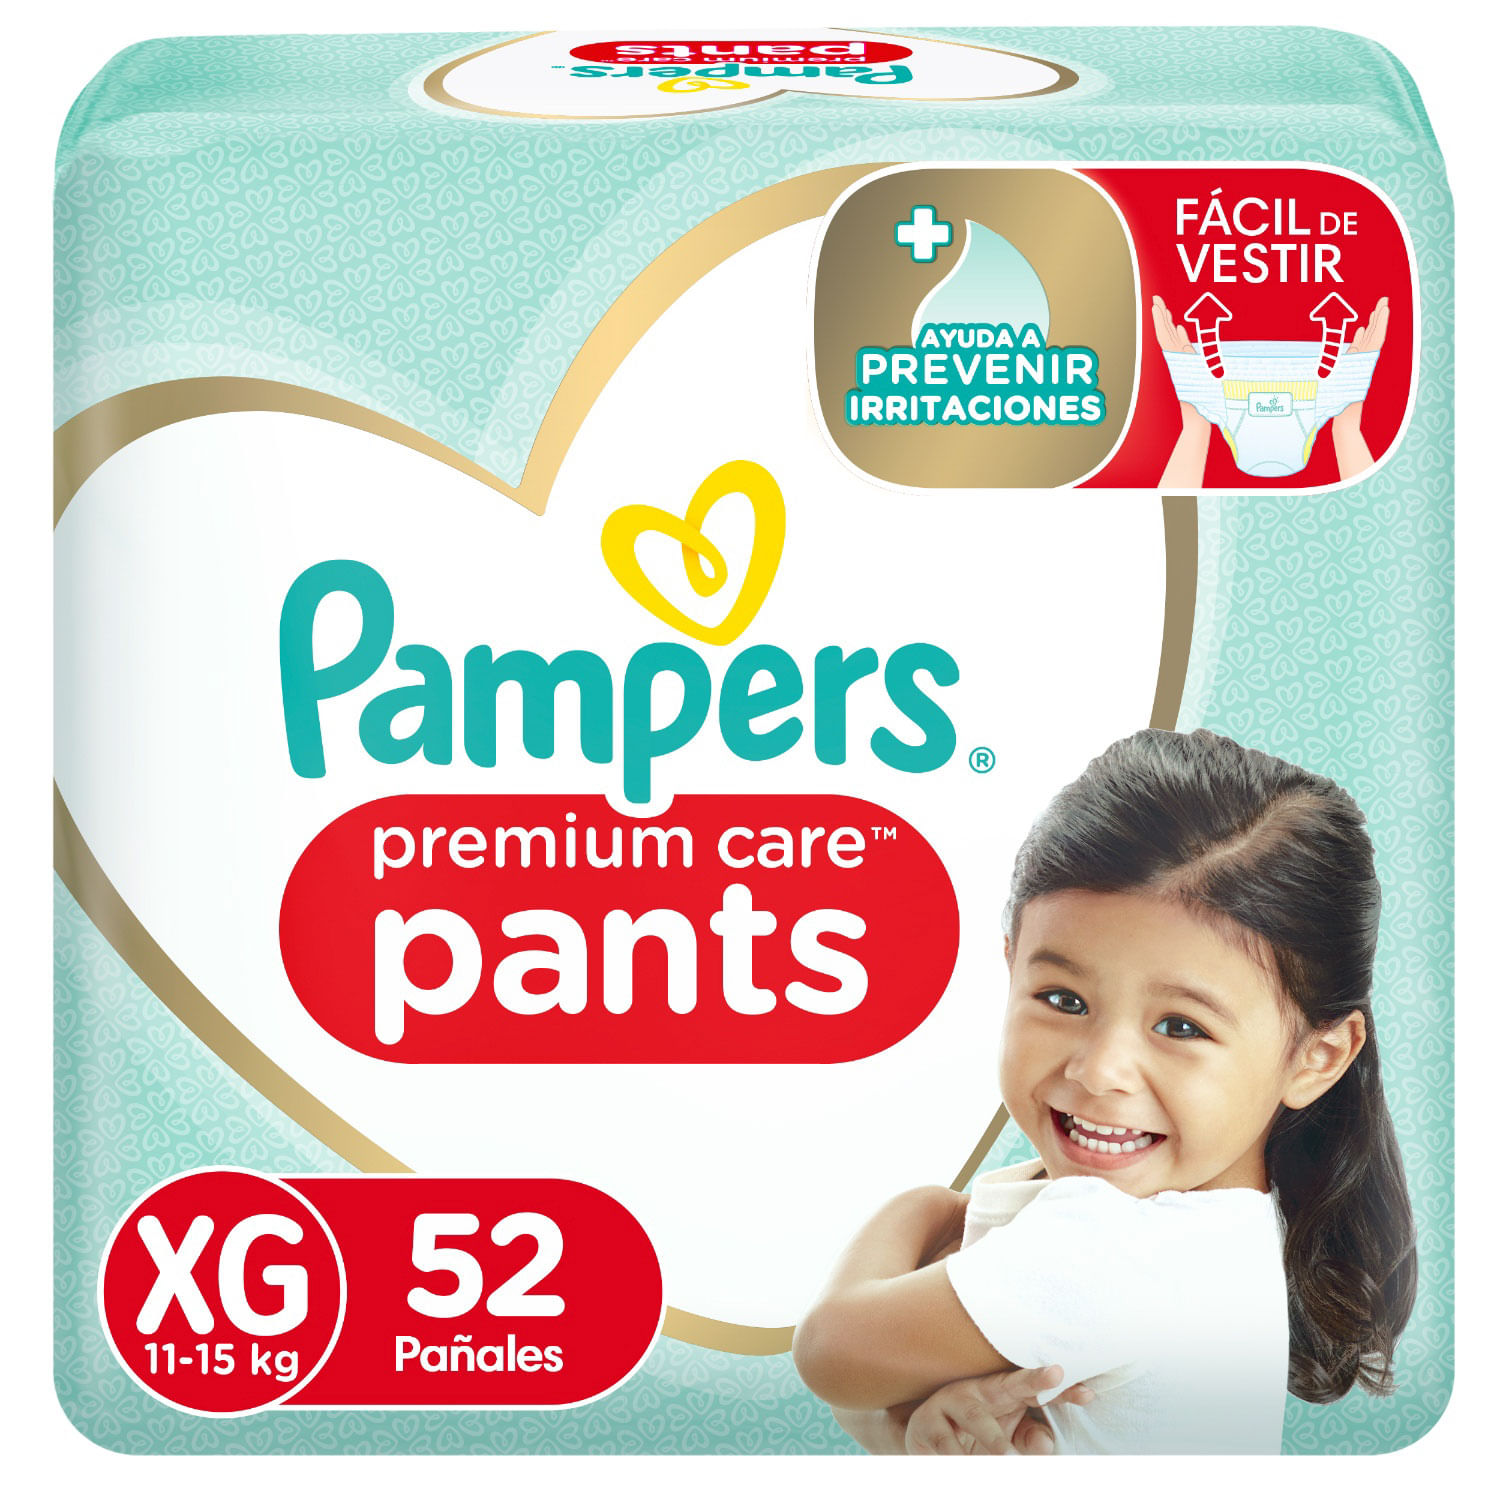 Pampers Baby-Dry - Pañales desechables absorbentes, talla 3, 104 unidades